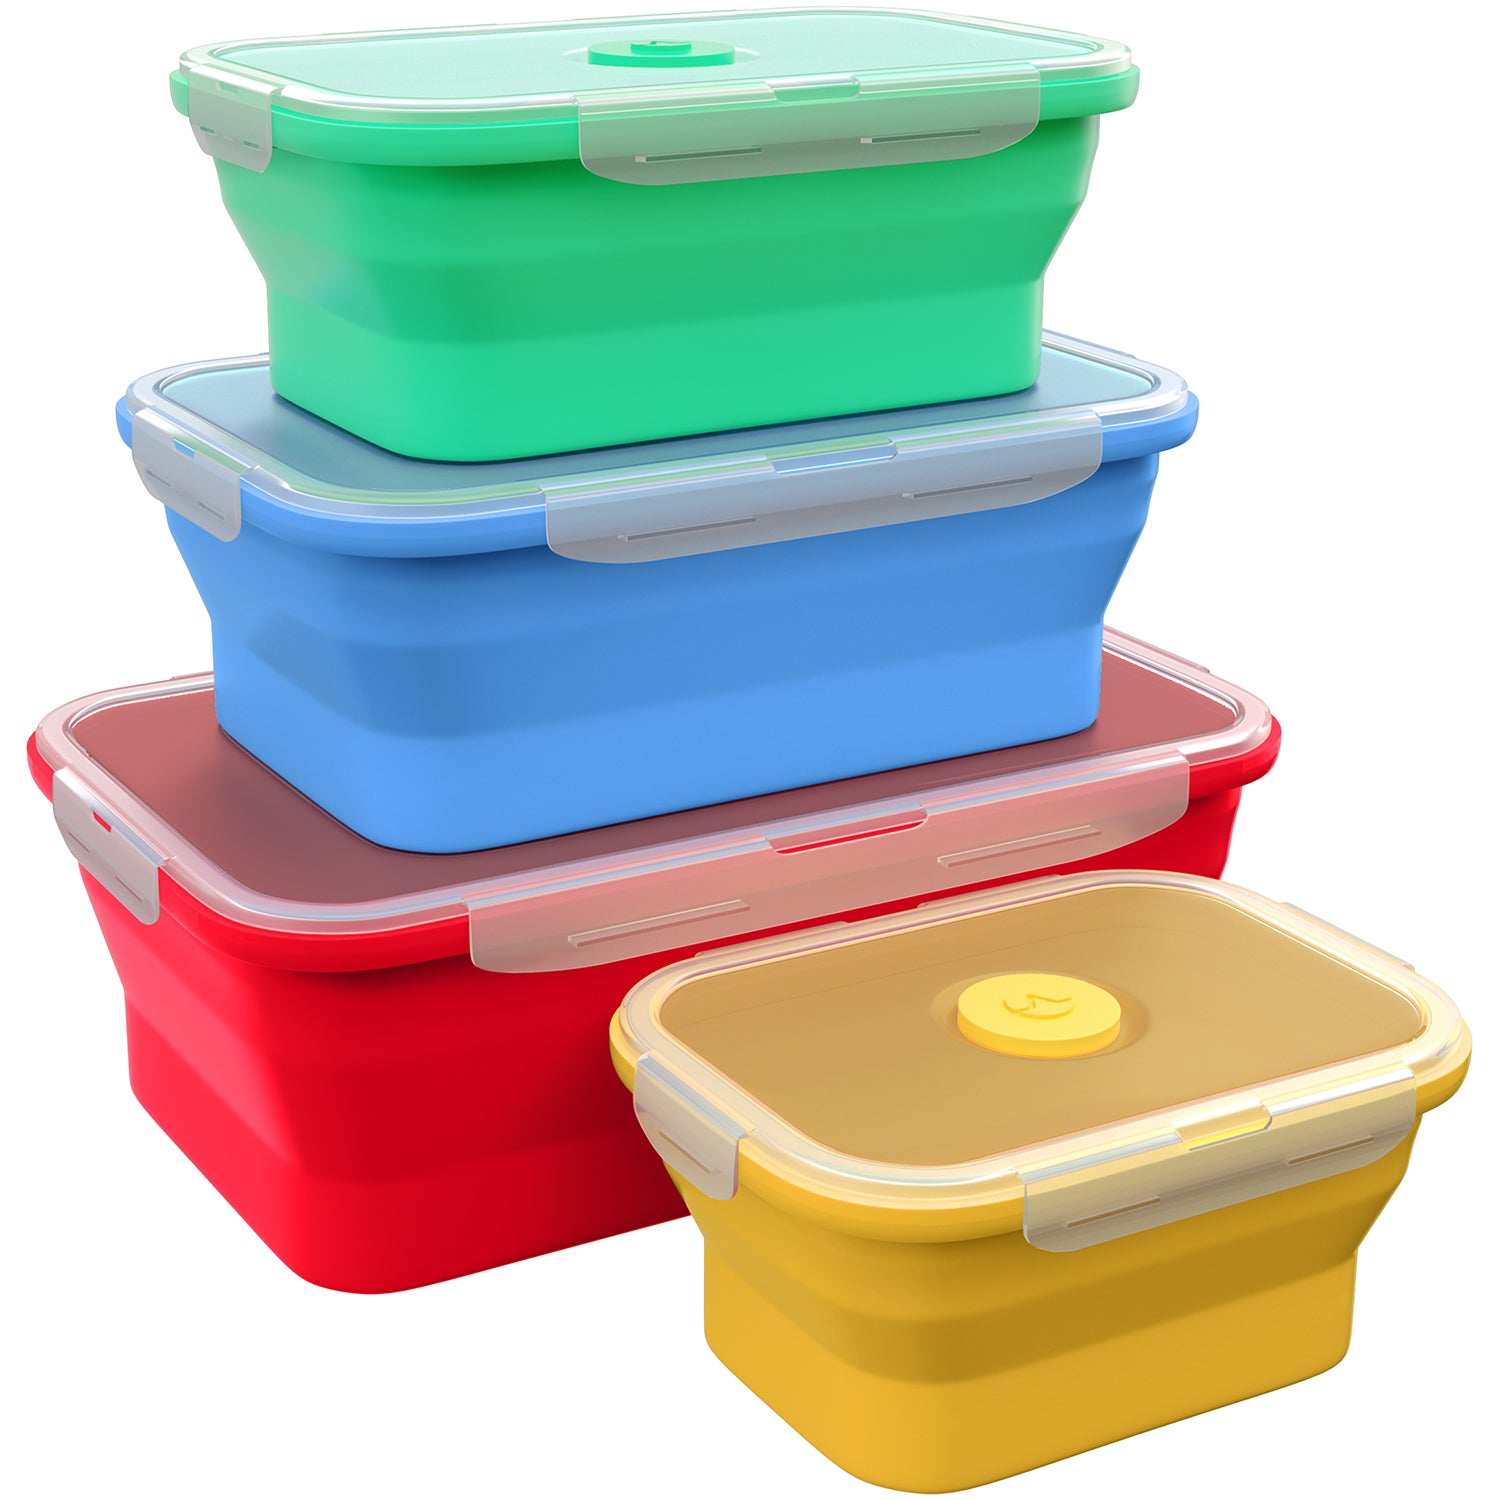 Silicone Smartfreeze Food Container Set - smartfreezecontainers